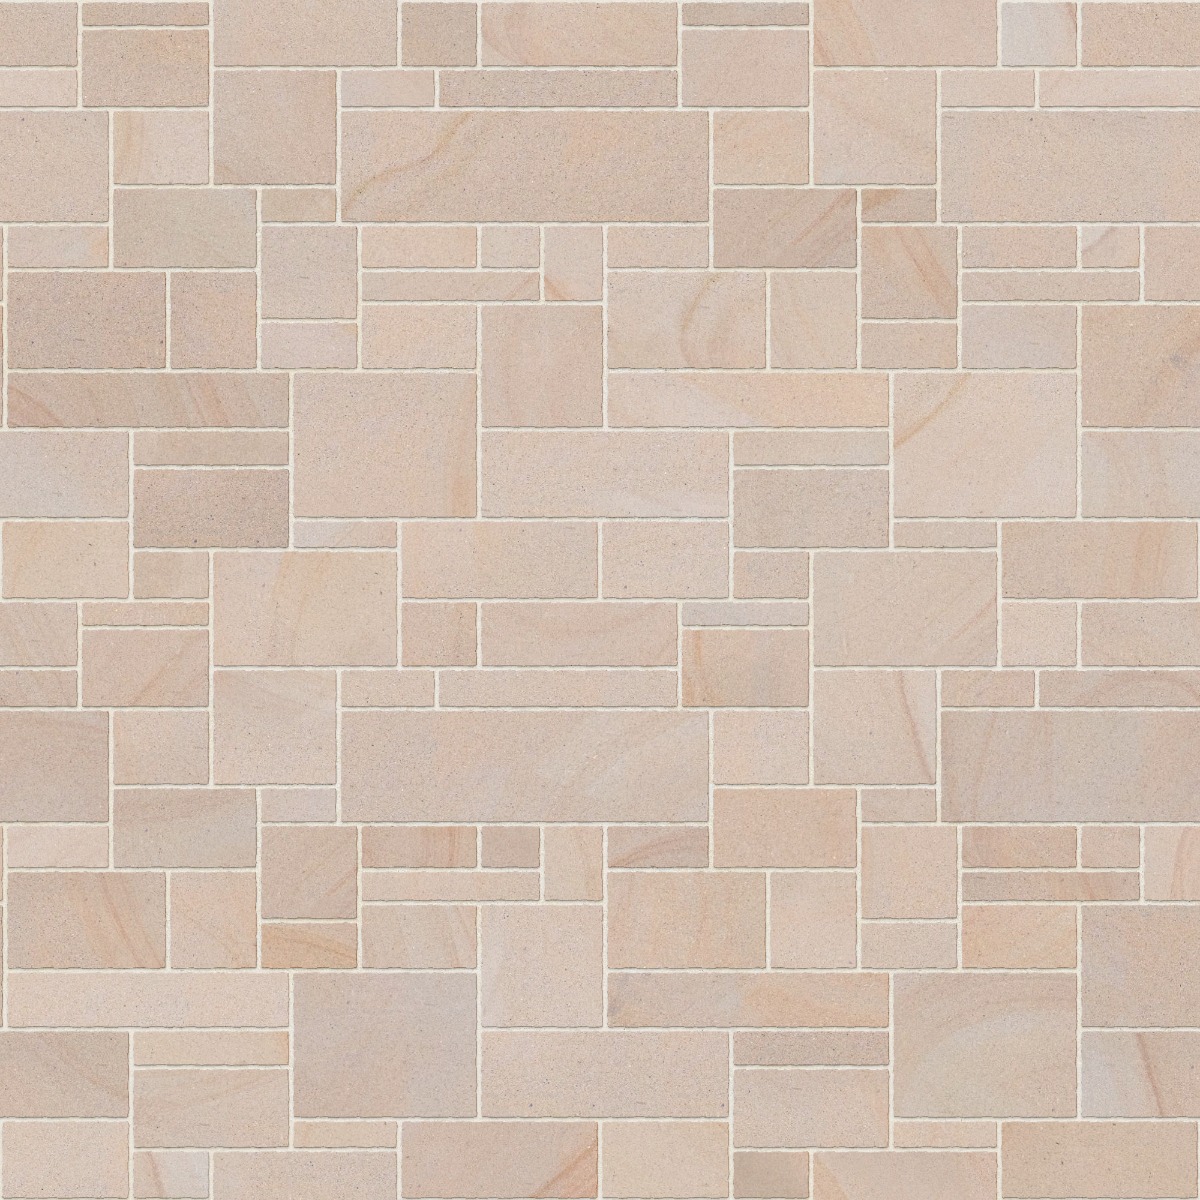 A seamless stone texture with blonde sandstone blocks arranged in a Uncoursed Ashlar pattern